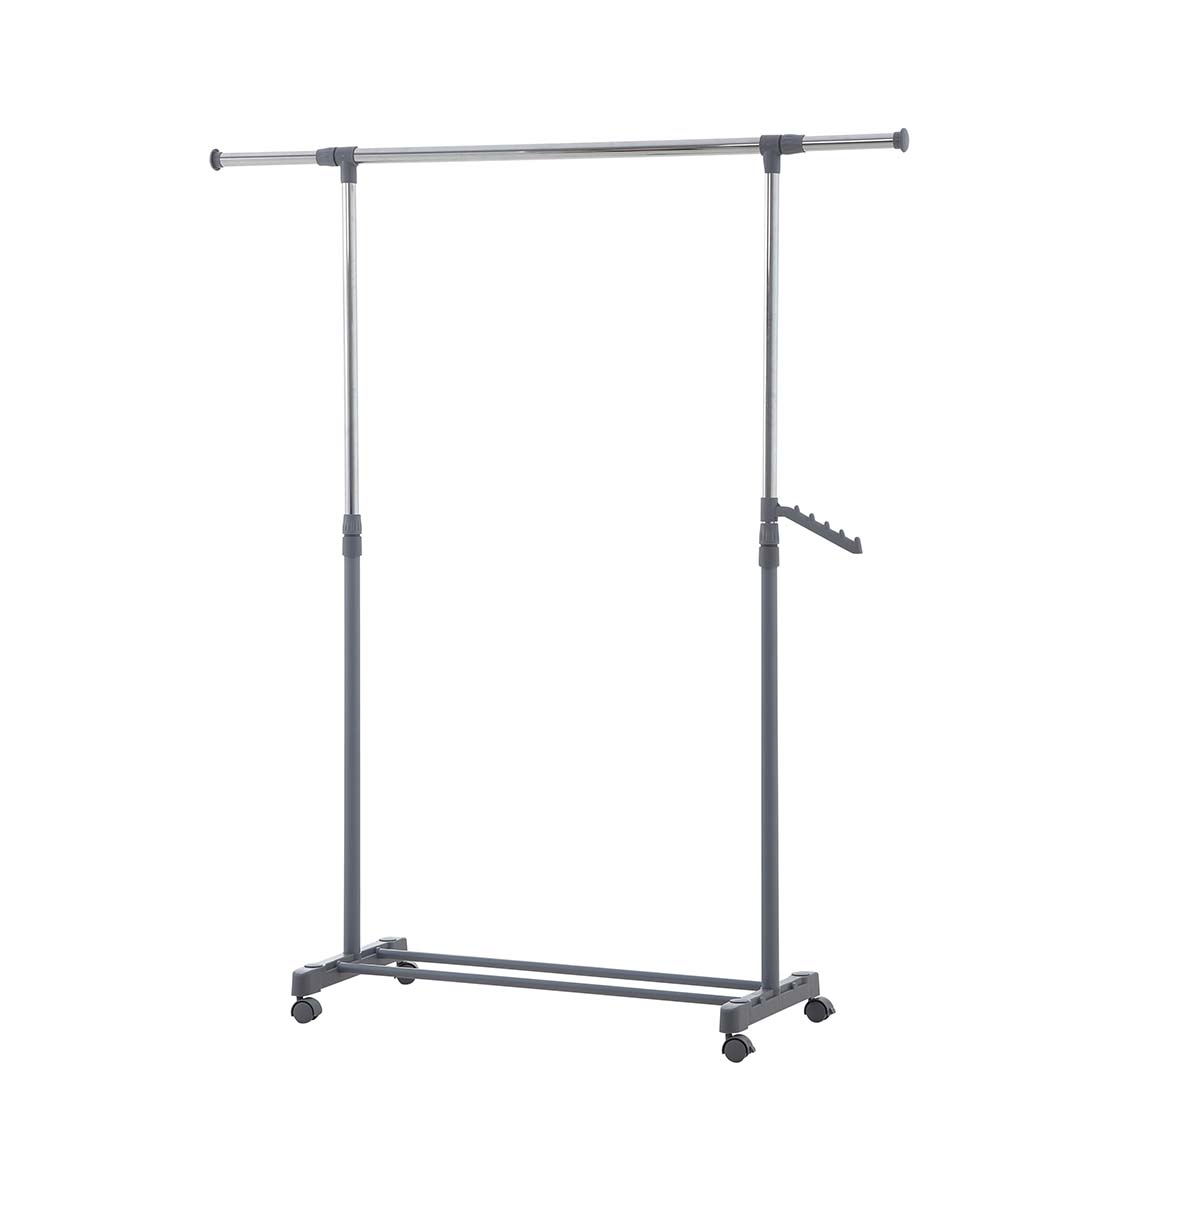 Single Rod Rolling Clothes Rack with Wheels  Metal Clothing Rack  Clothes Garment Coat Rack with Bottom Shelf